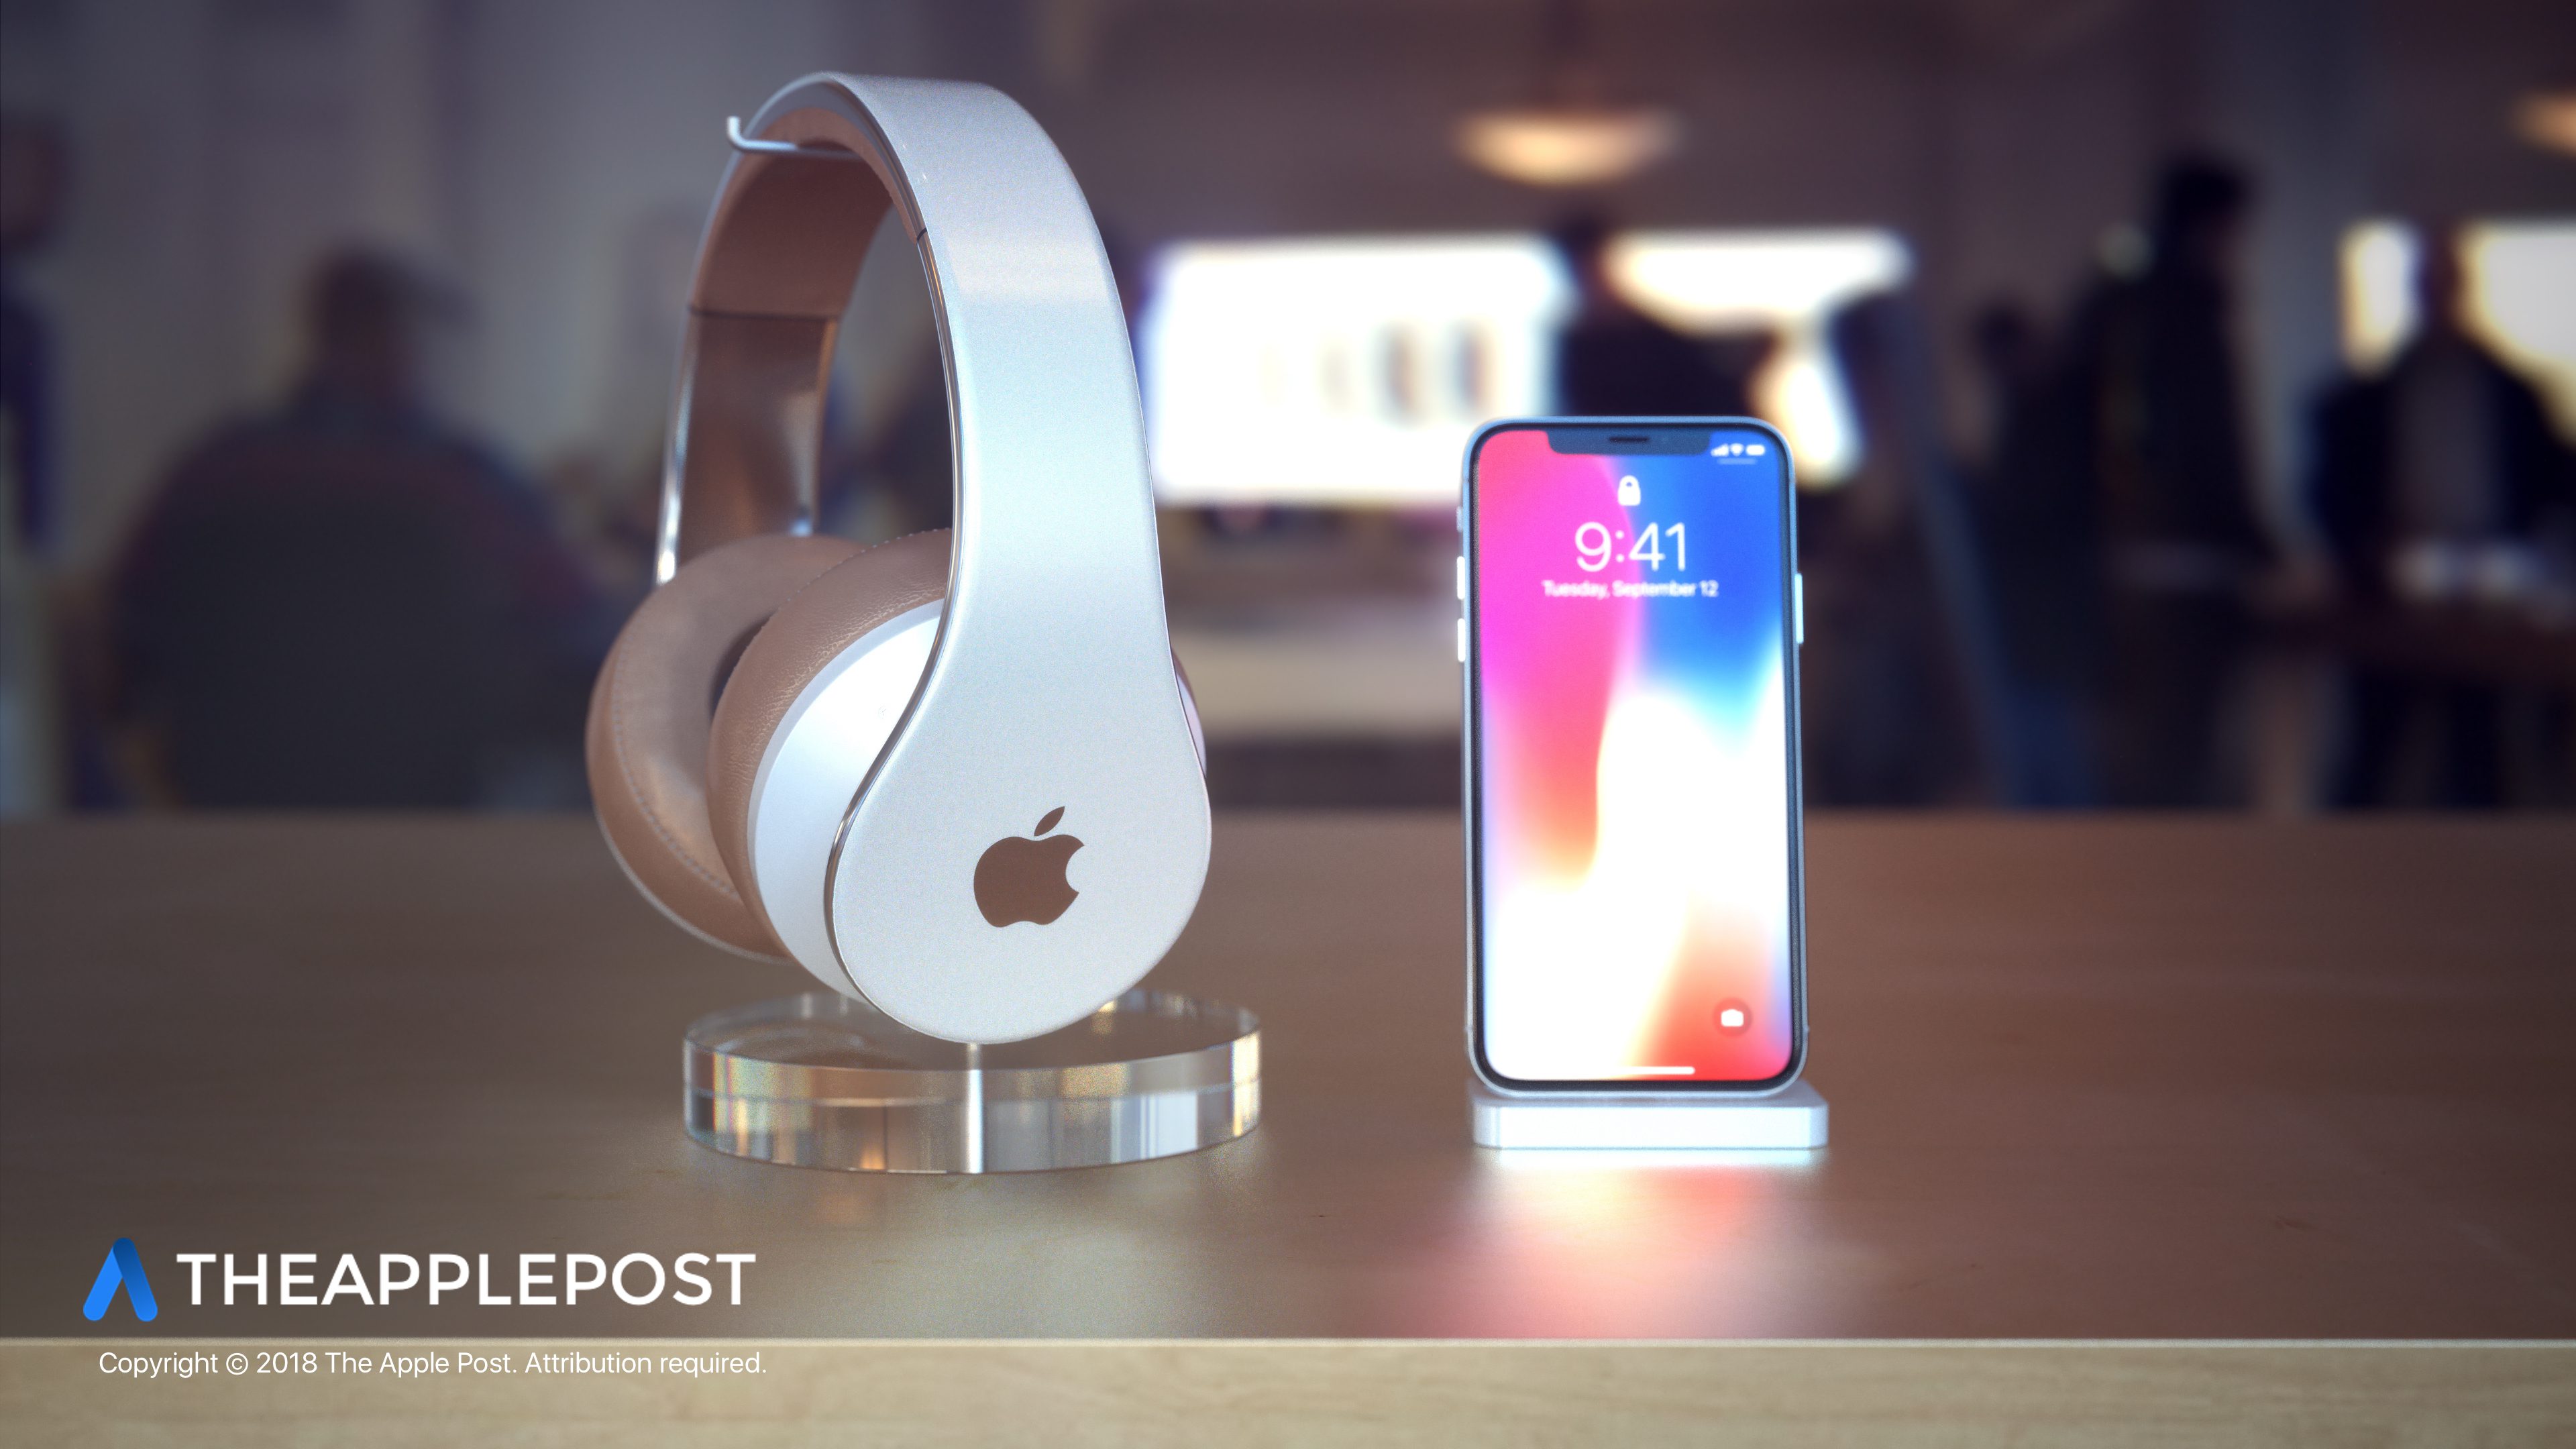 What do you think of this concept design for Apple's rumored over ...